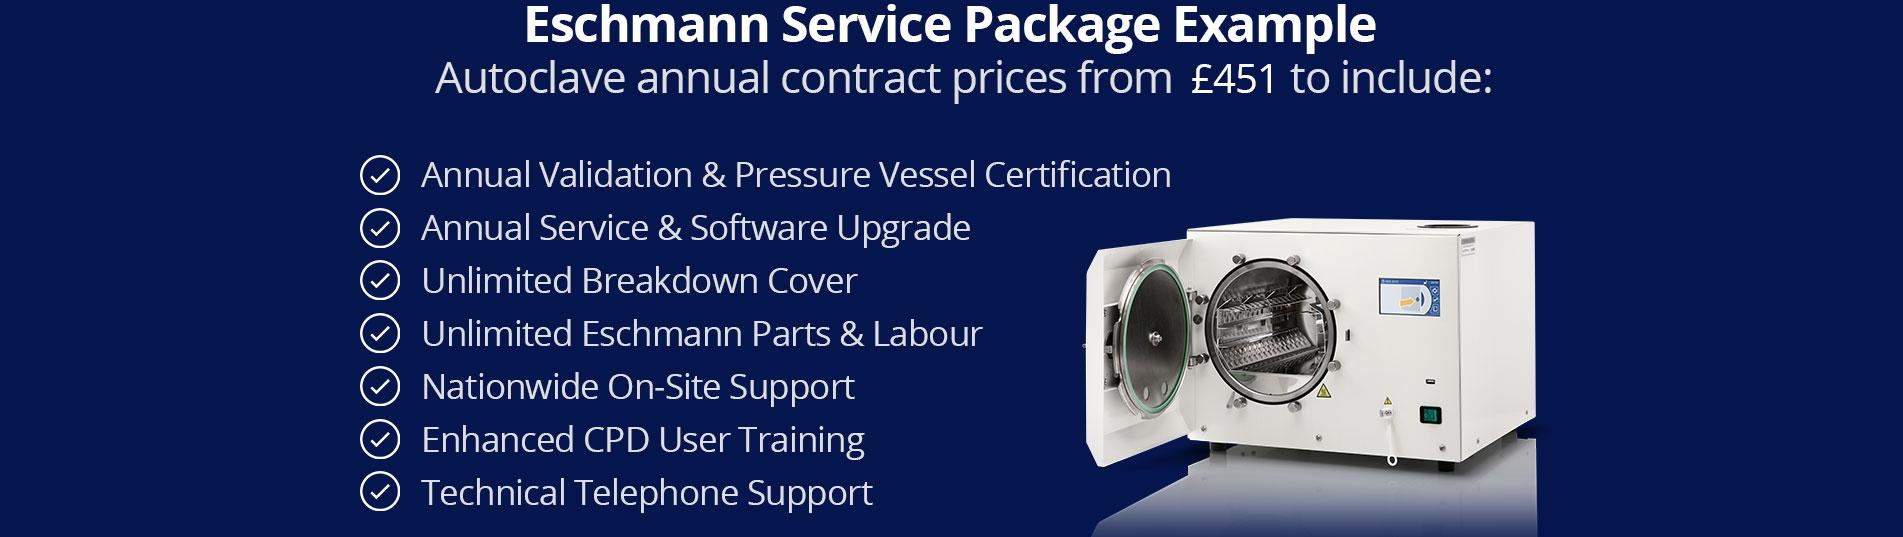 Eschmann service package example - autoclave annual controact prices from £451 to include all features of Care & Cover